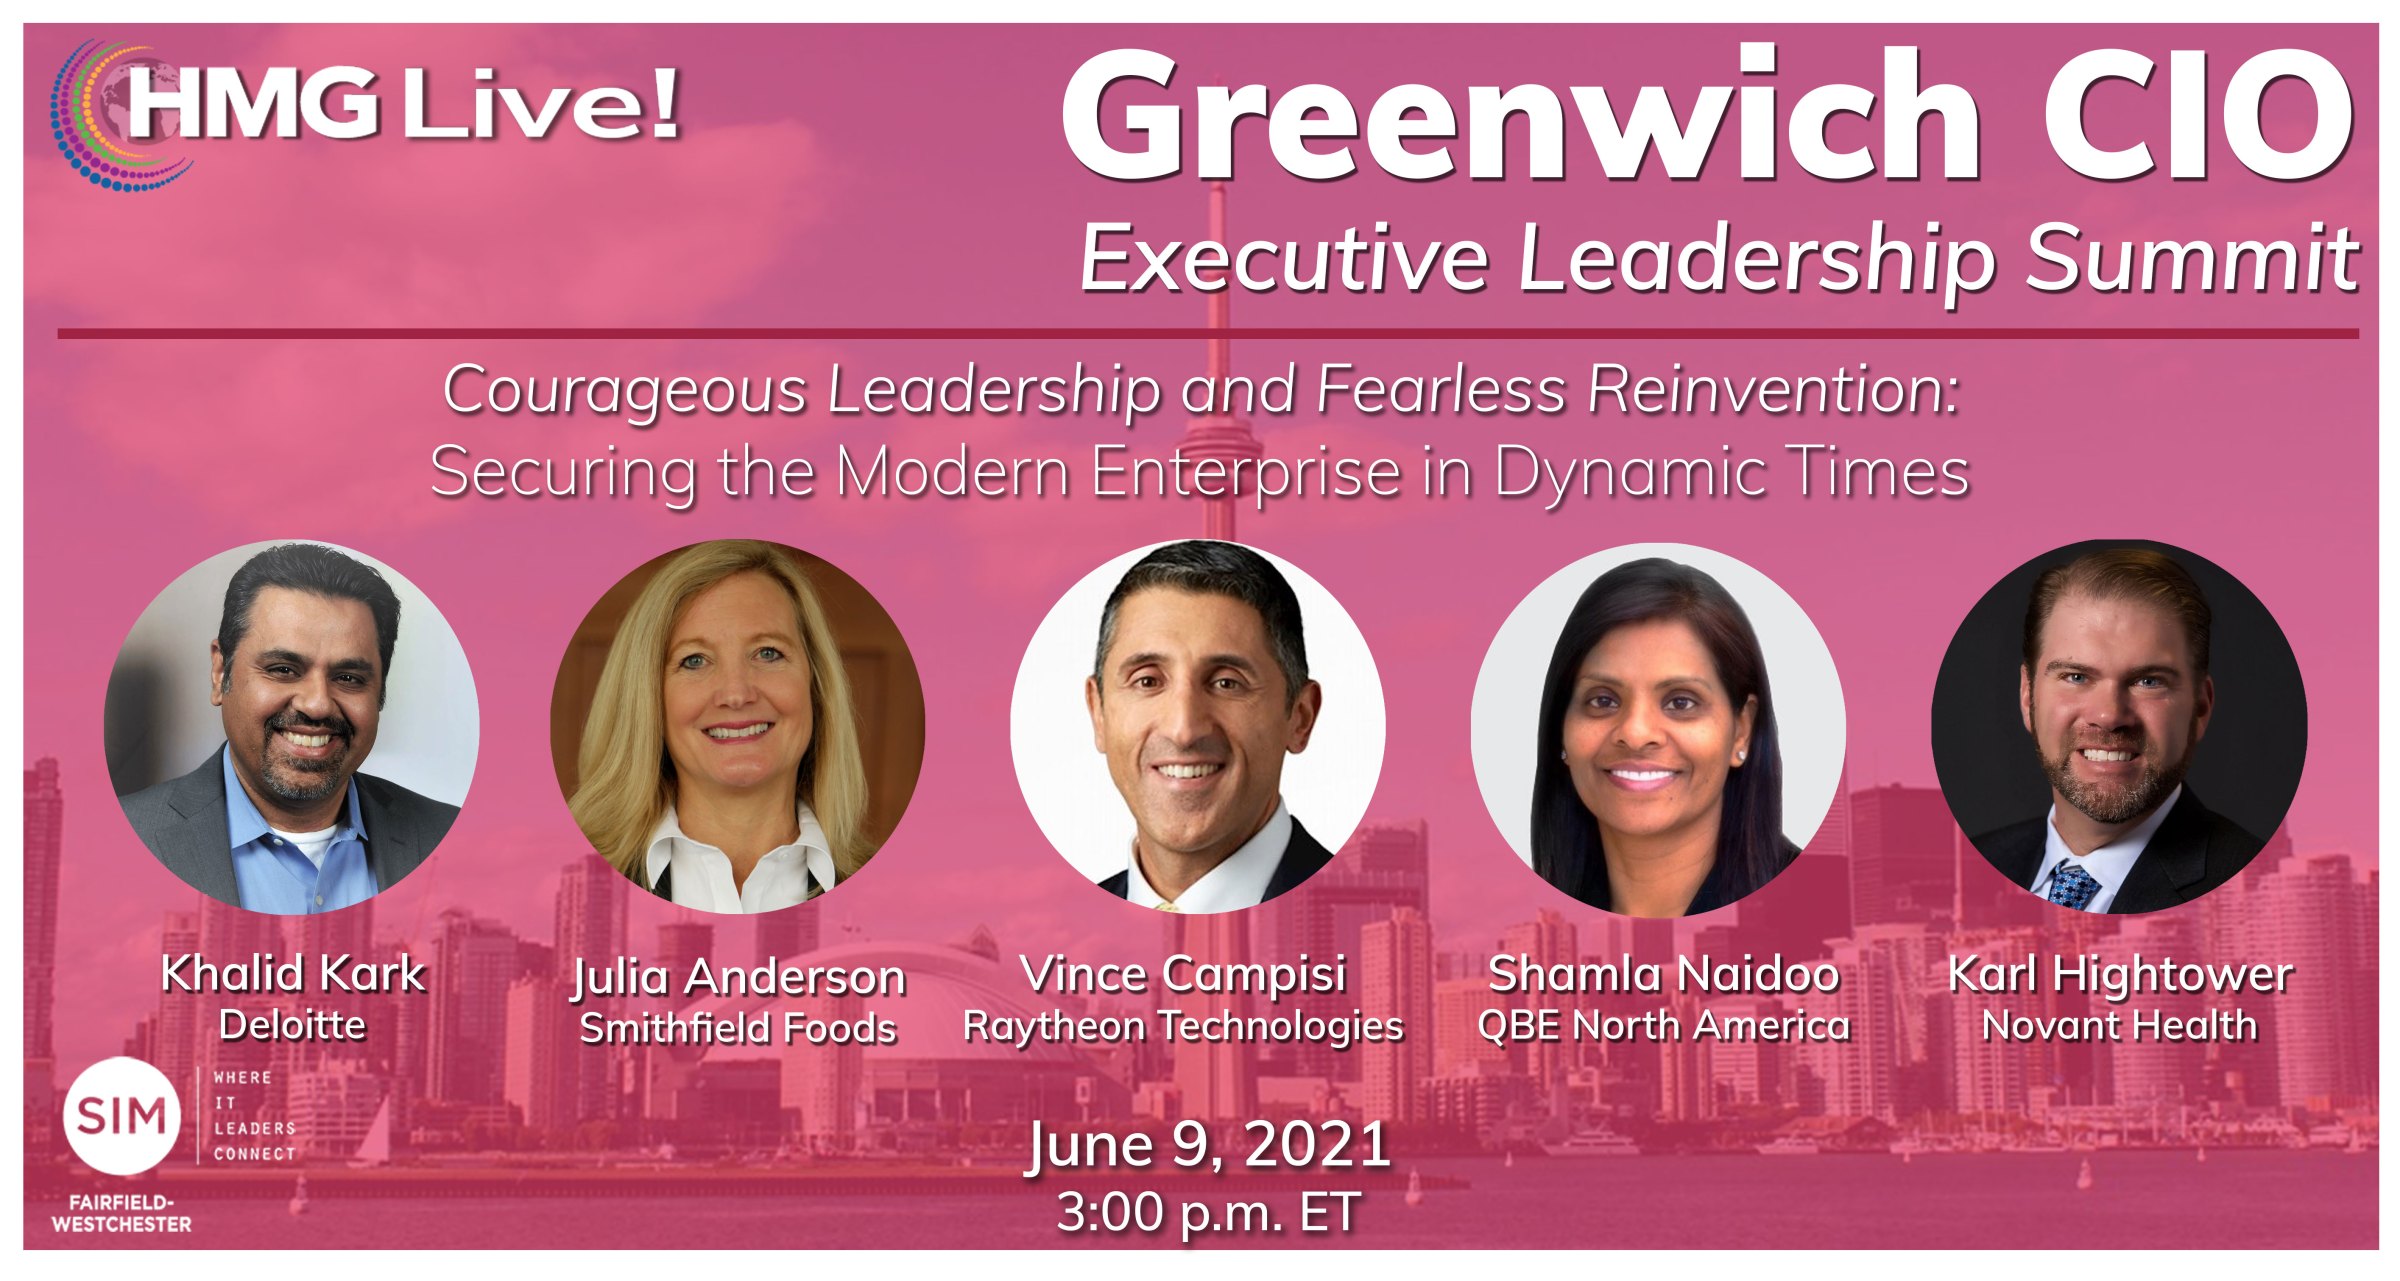 CIO Leadership: Designing an Agile Enterprise Architecture with a Need for Speed will Drive the Discussion at the 2021 HMG Live! Greenwich CIO Executive Leadership Summit on June 9